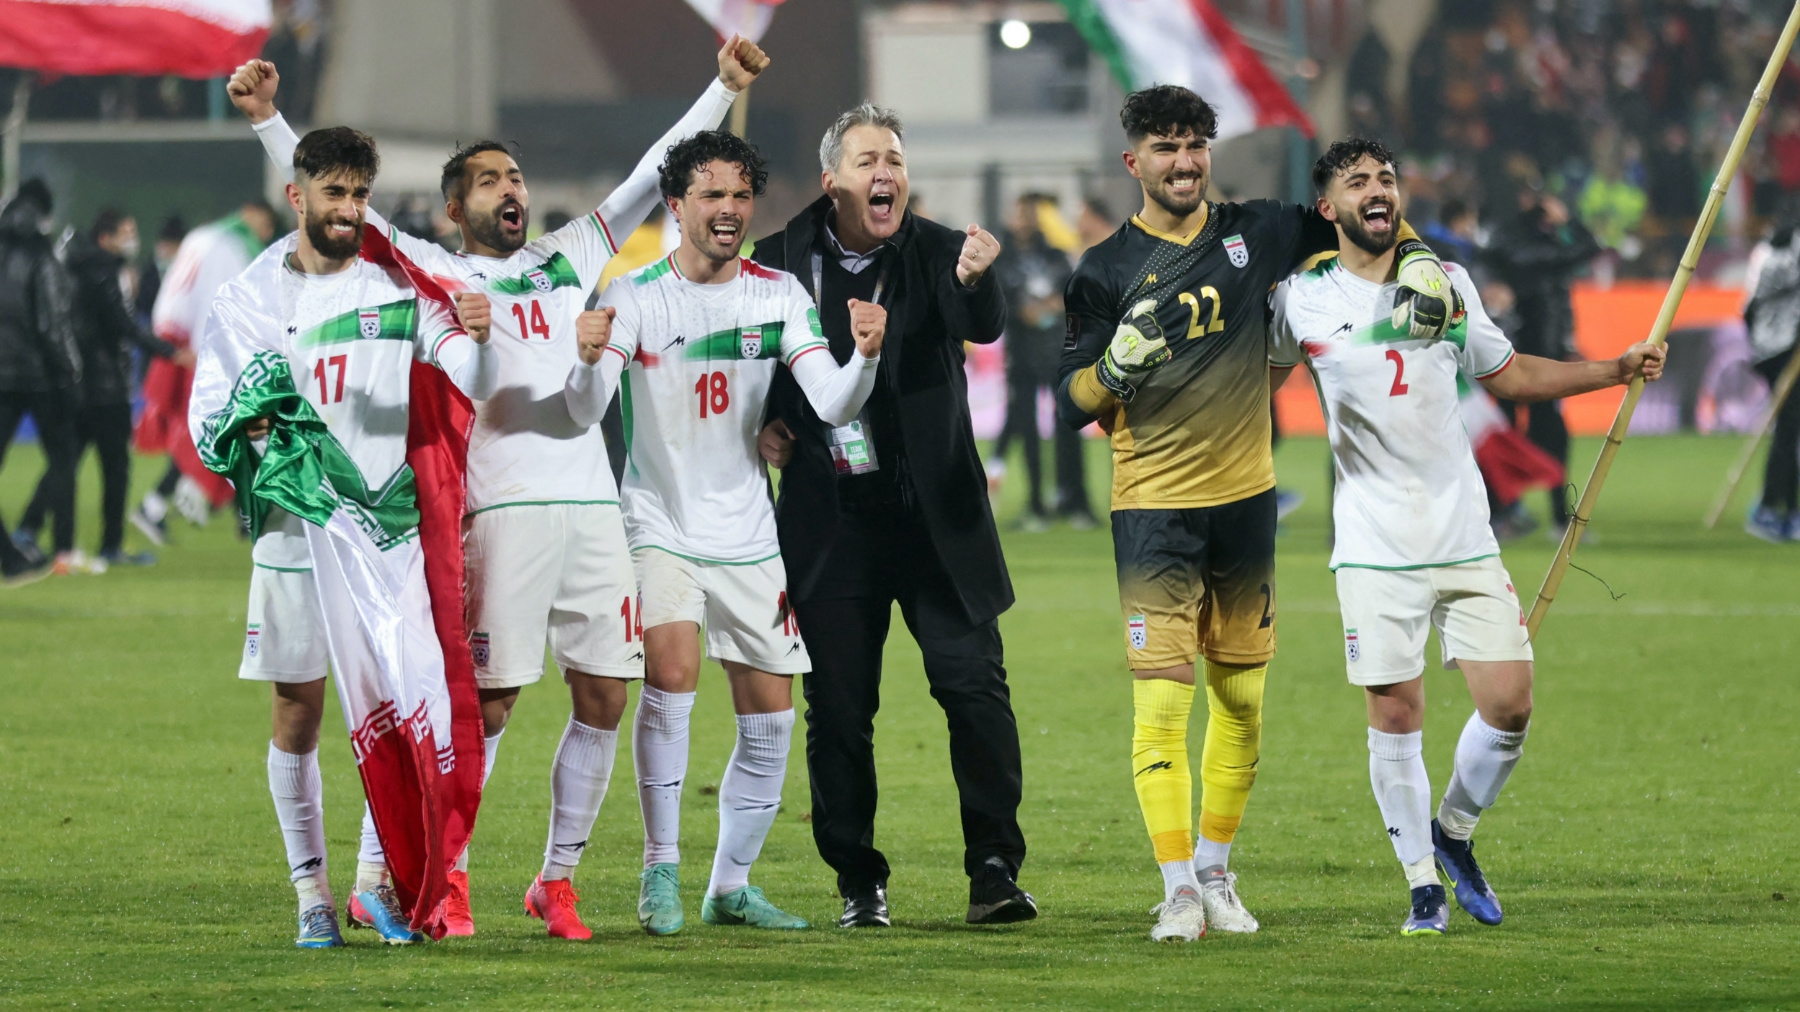 Iran's players celebrate with their fans after qualifying for the 2022 Qatar World Cup after their win against Iraq in the Asian Qualifiers football match at the Azadi Sports Complex Tehran, on January 27, 2022 (AFP)